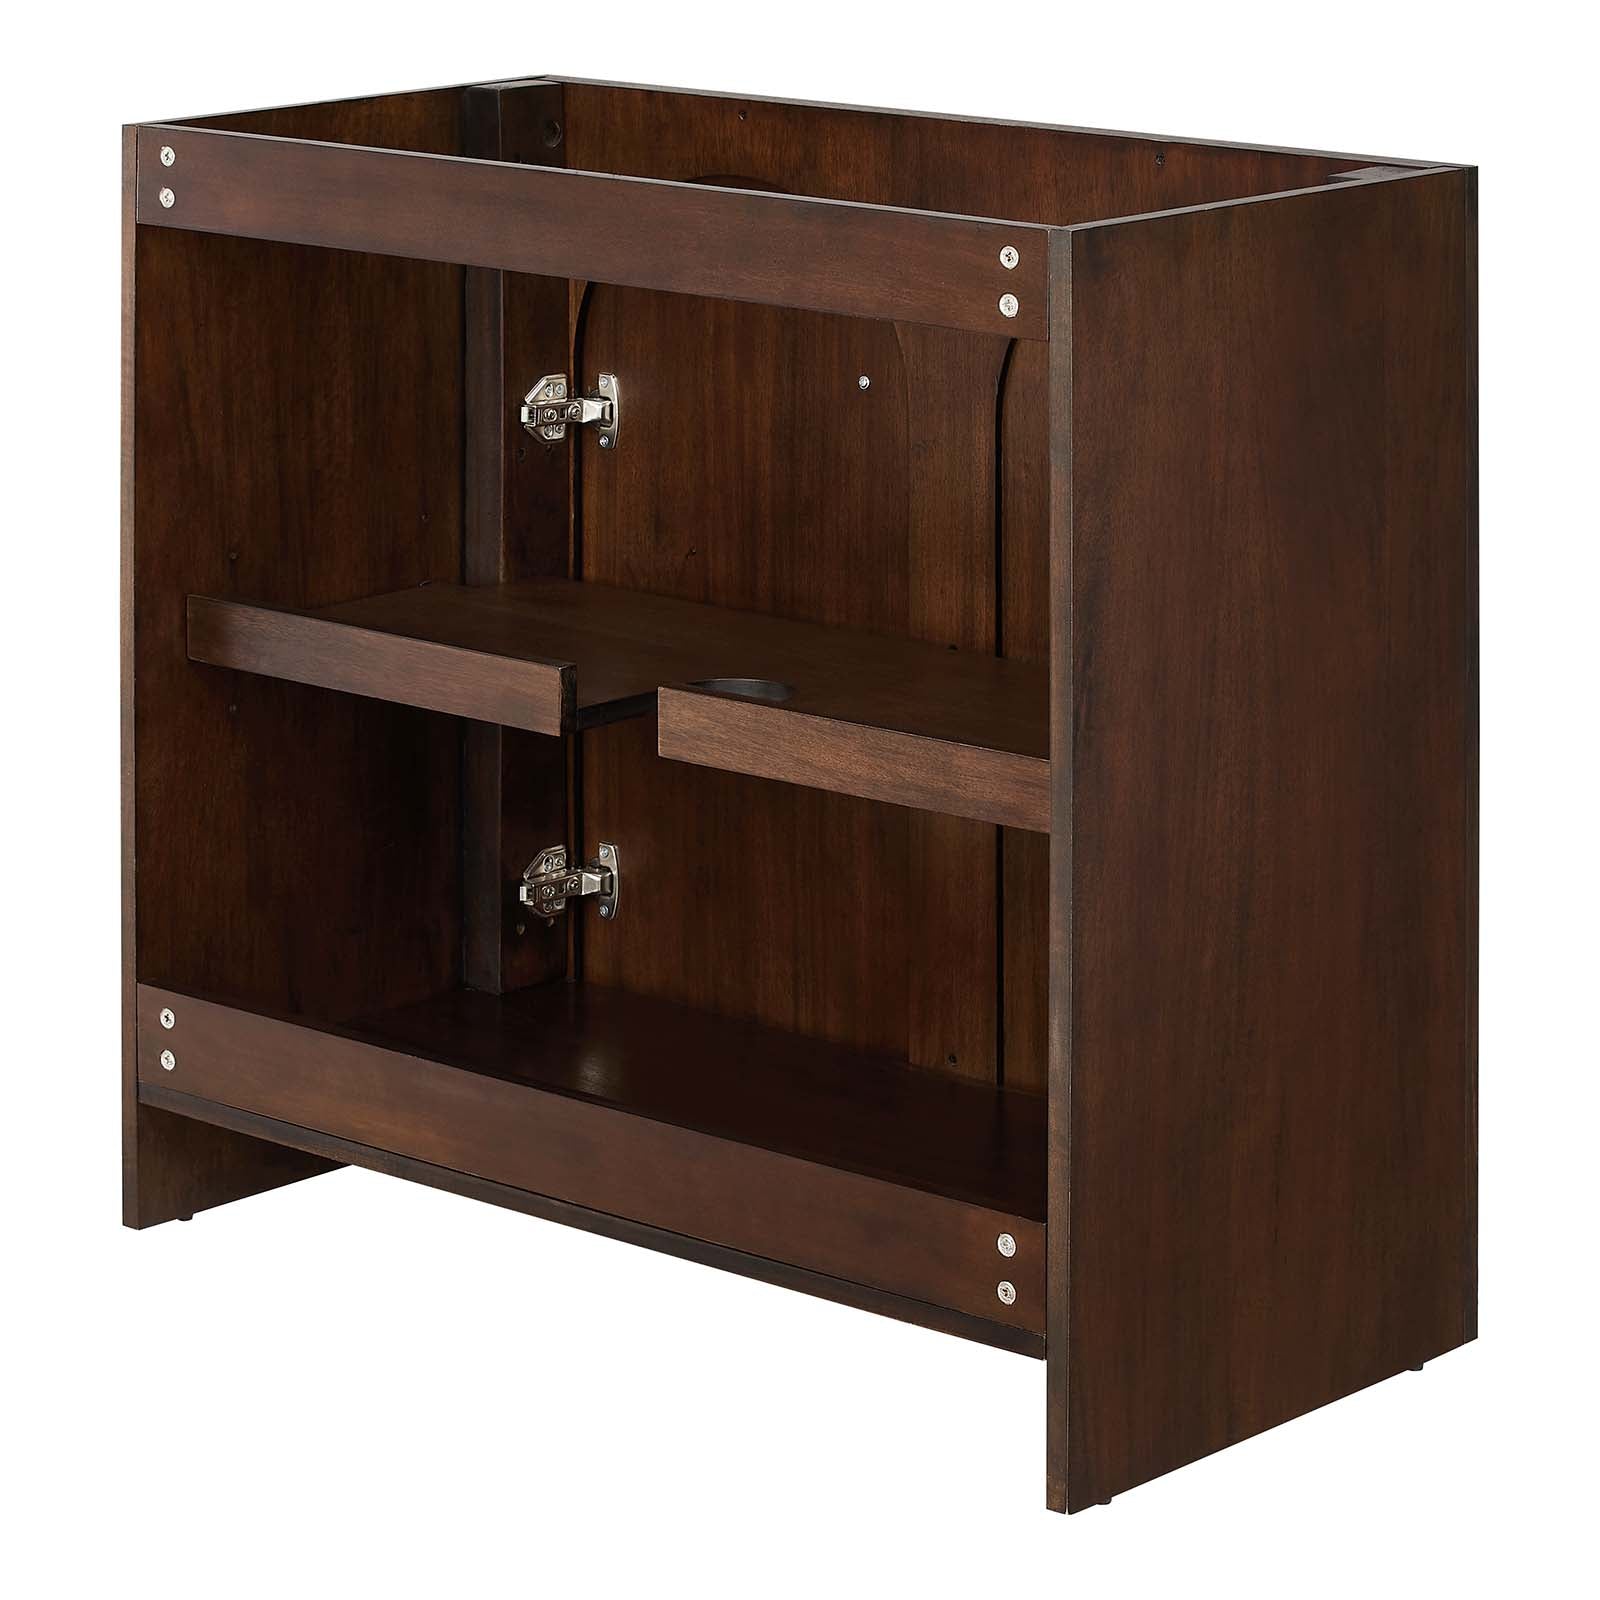 Appia 36" Bathroom Vanity Cabinet (Sink Basin Not Included) - East Shore Modern Home Furnishings